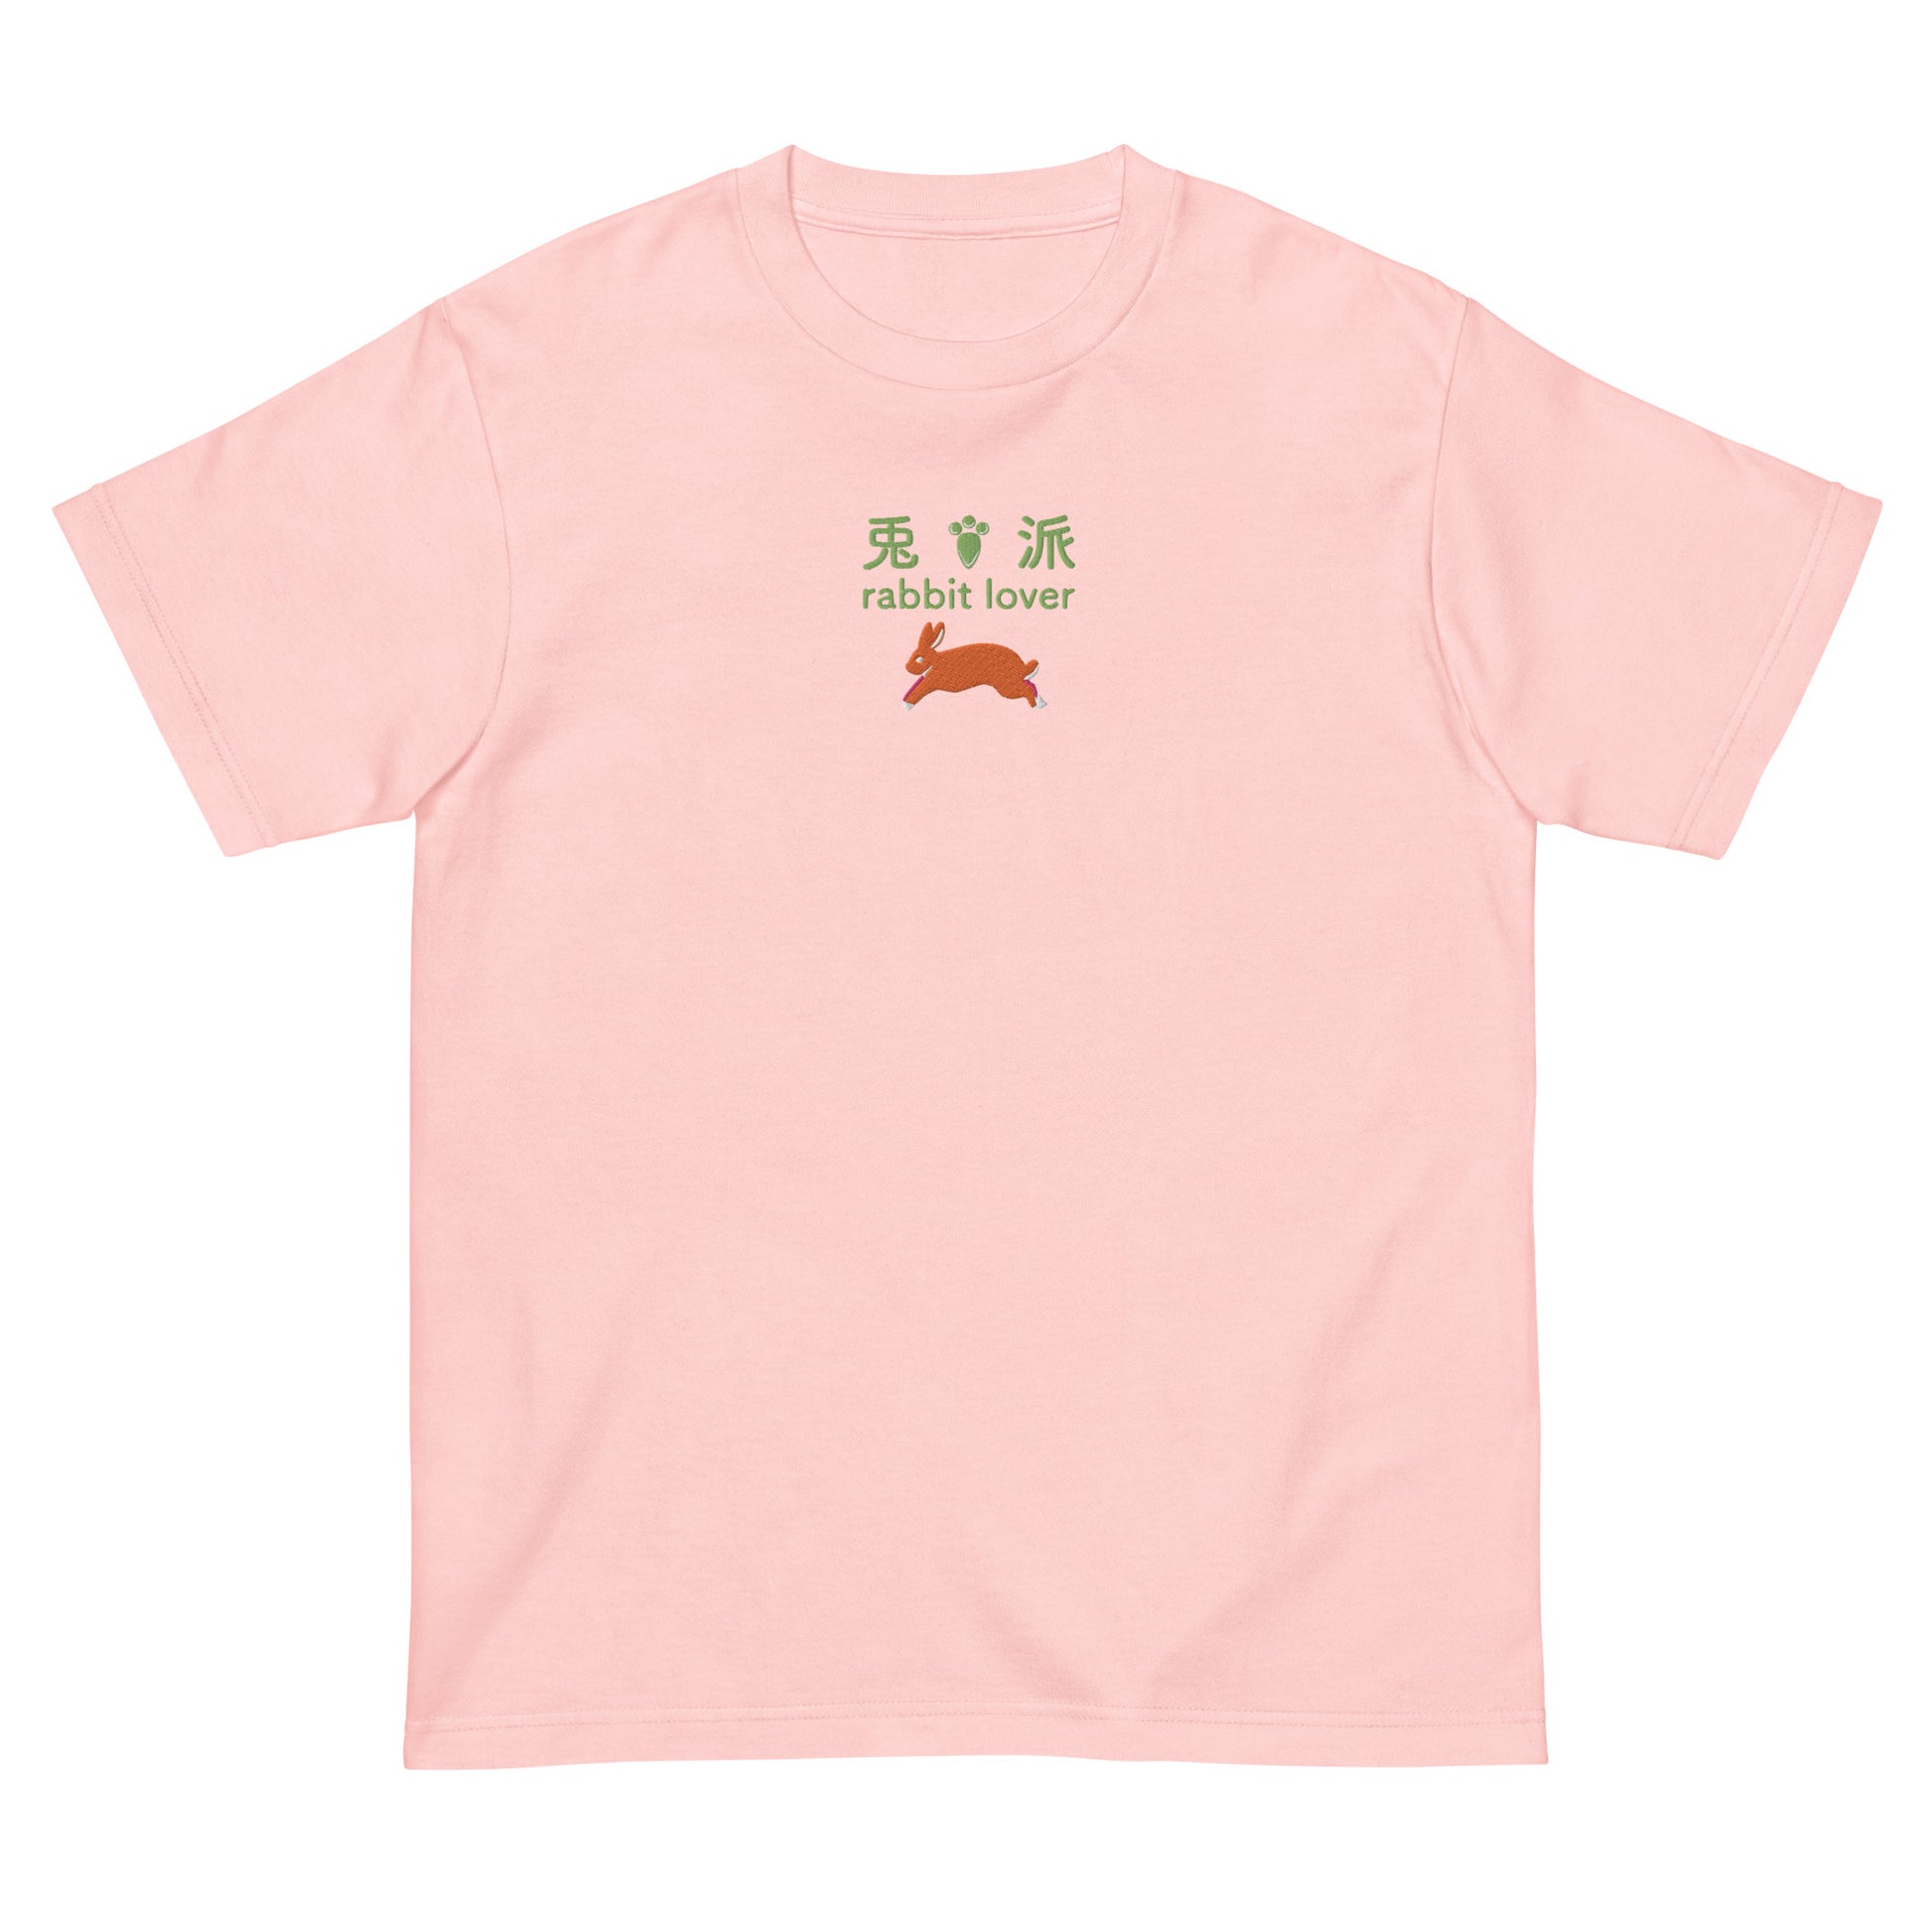 Pink High Quality Tee - Front Design with an Gray, White Embroidery "Rabbit Lover" in Japanese,Chinese and English, and Rabbit Embroidery